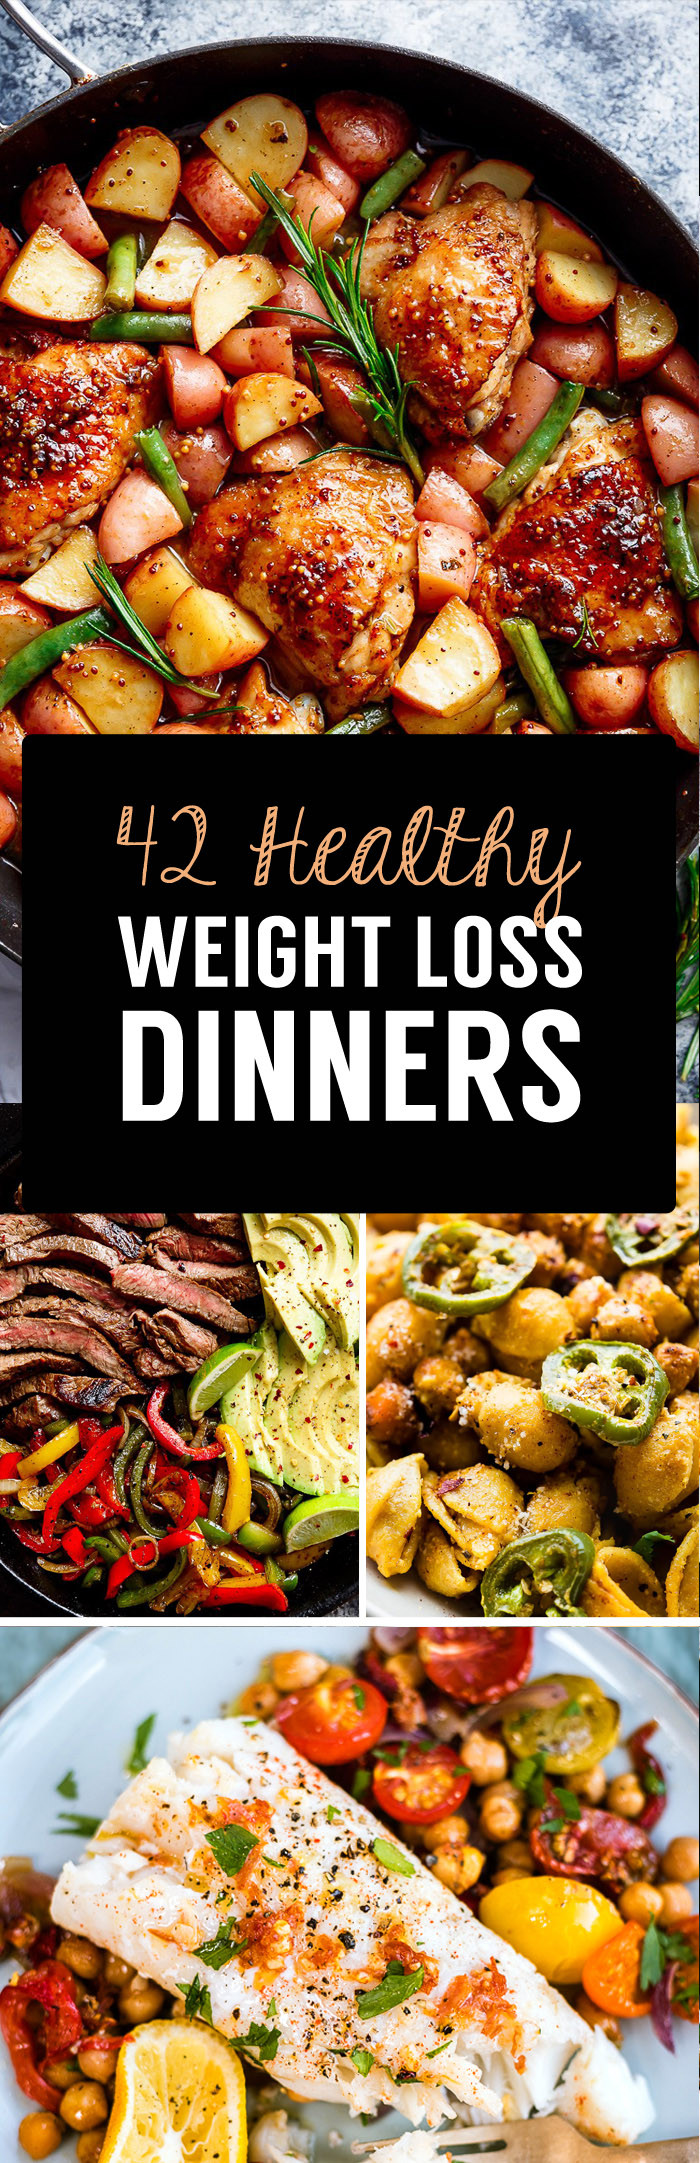 Weight Loss Recipes
 42 Weight Loss Dinner Recipes That Will Help You Shrink